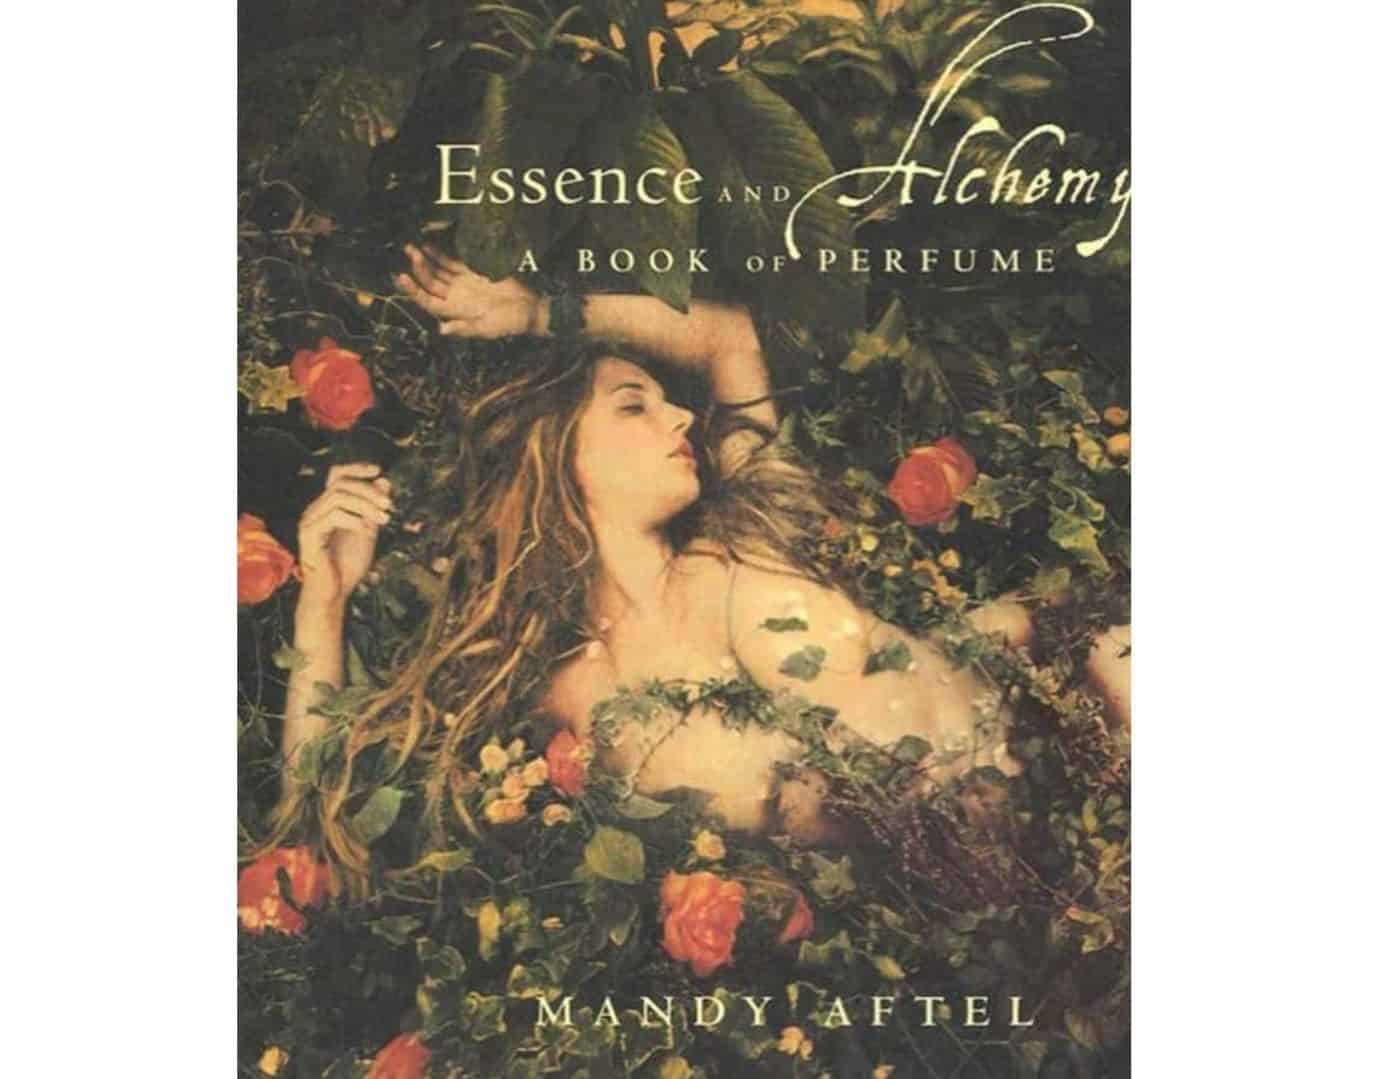 Picture of the cover of Essence and Alchemy A Natural History of Perfume